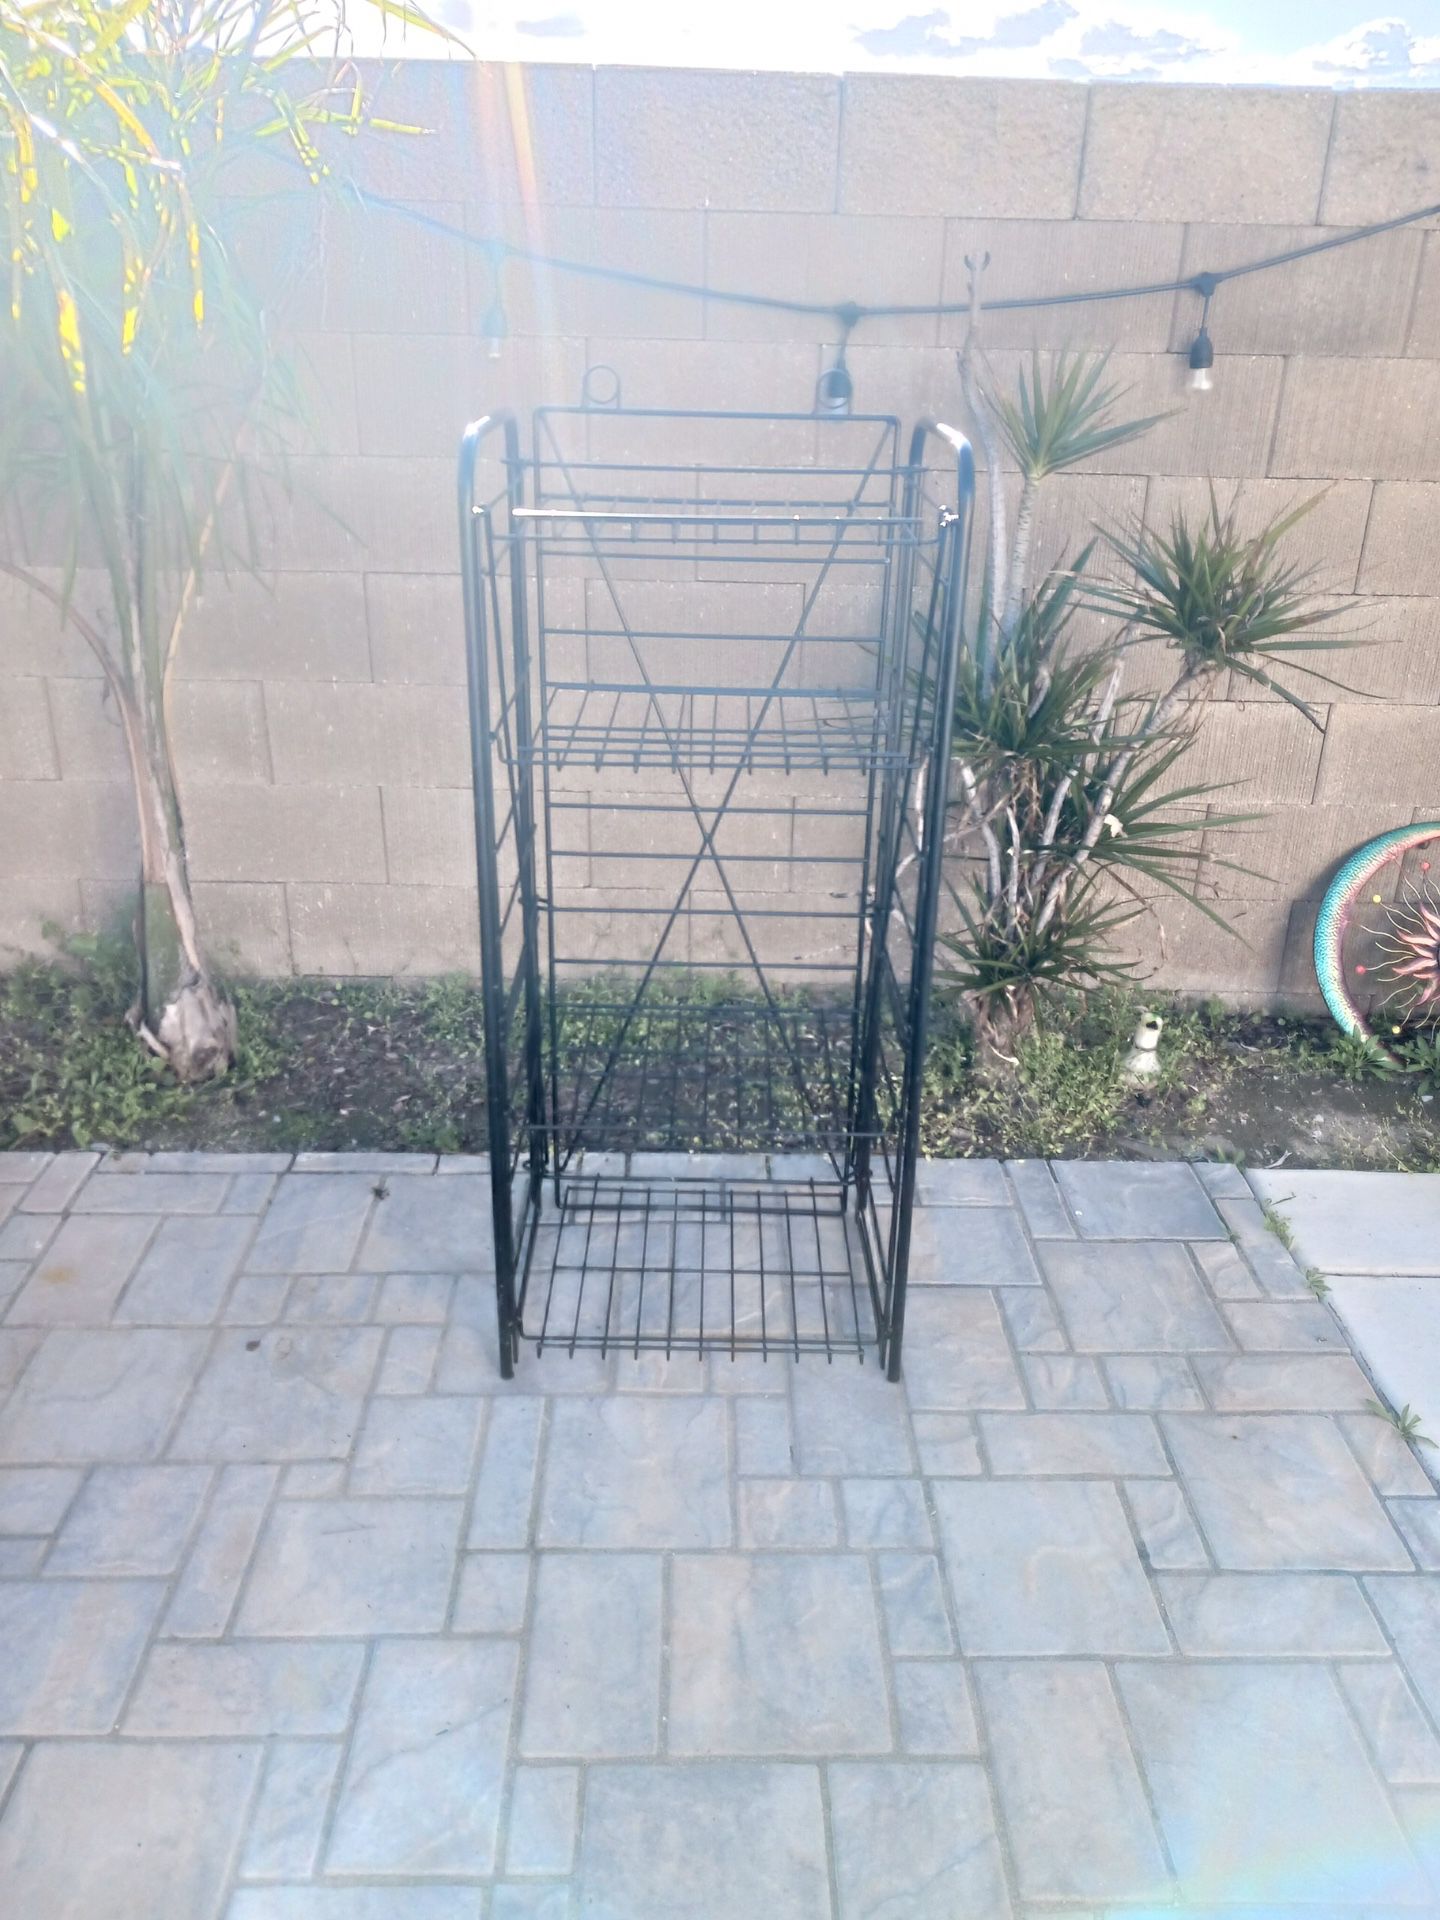 Only $50.00           Or Best Offer  item,  metal wire rack with 4 shelves  Rack is foldable for easy transport  Rack great for organizing kitchen,  g